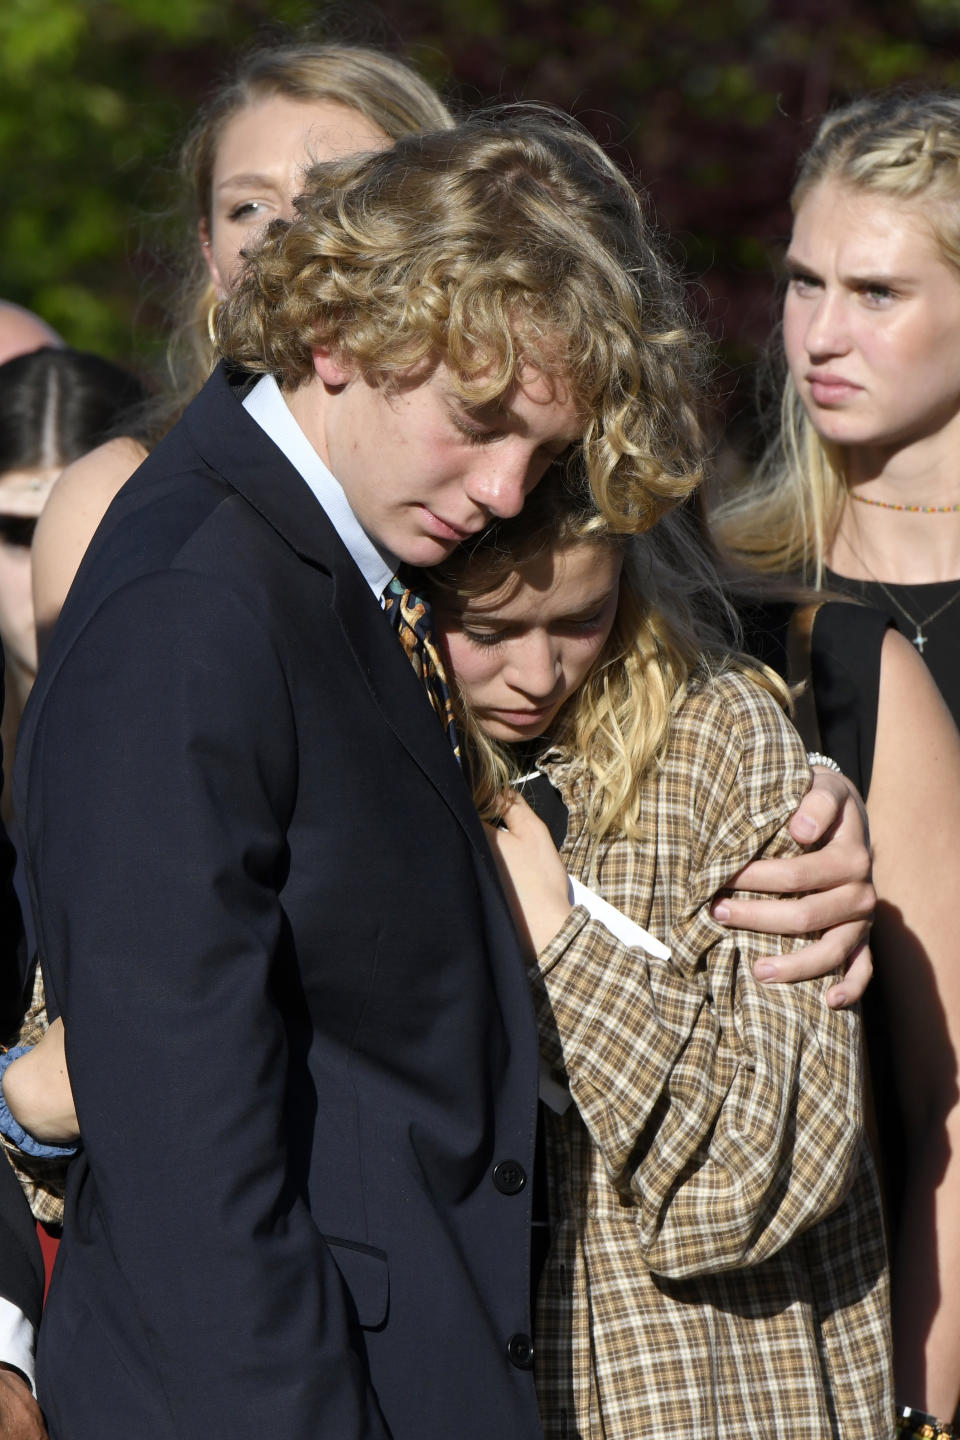 Teddy, brother of Riley Howell, and Lauren Westmoreland, girlfriend of Riley, comfort each other after a memorial service for Riley Howell in Lake Junaluska, N.C., Sunday, May 5, 2019. Family and hundreds of friends and neighbors are remembering Howell, a North Carolina college student credited with saving classmates' lives by rushing a gunman firing inside their lecture hall. (AP Photo/Kathy Kmonicek)